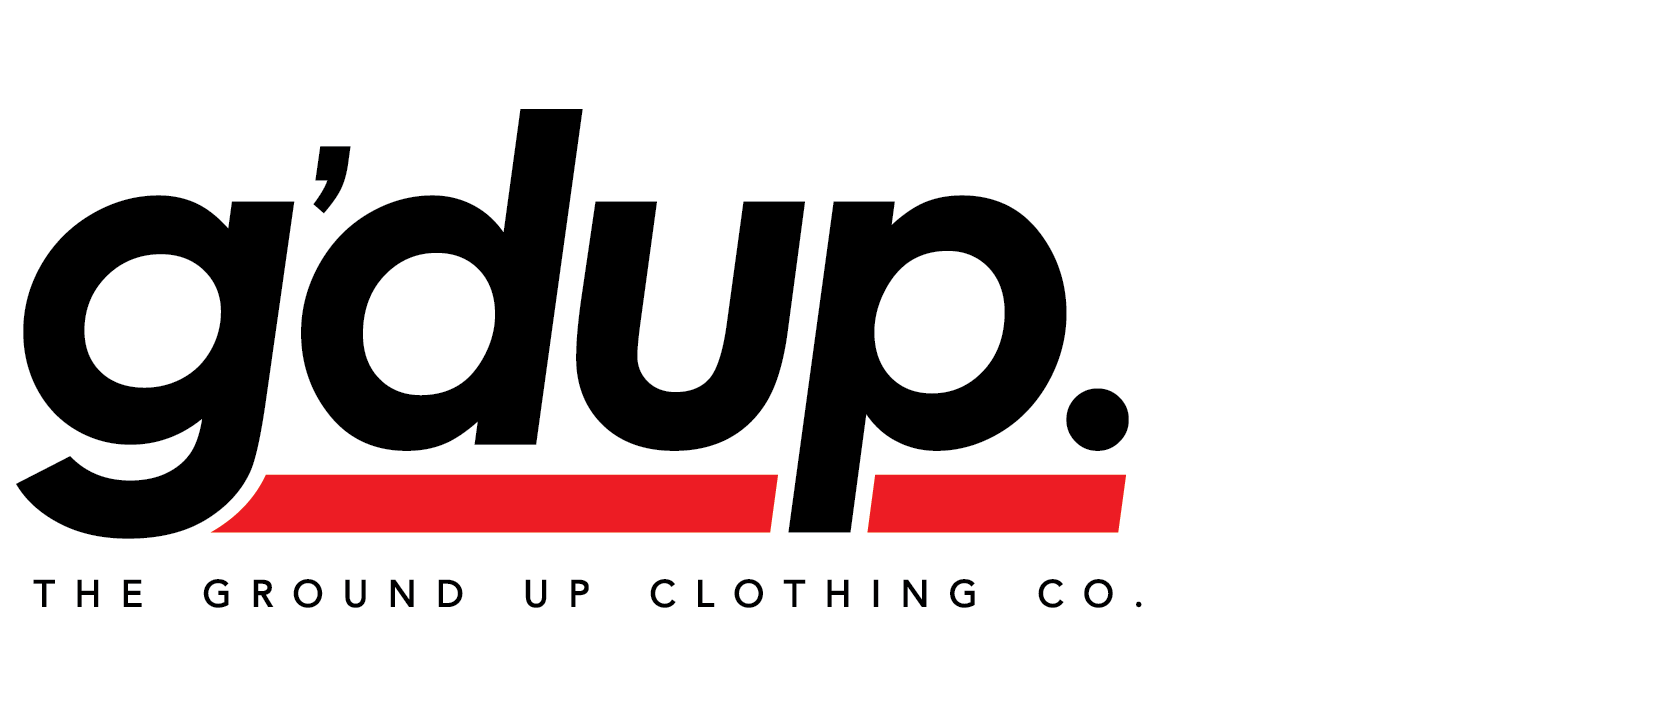 The Ground Up Clothing Co.